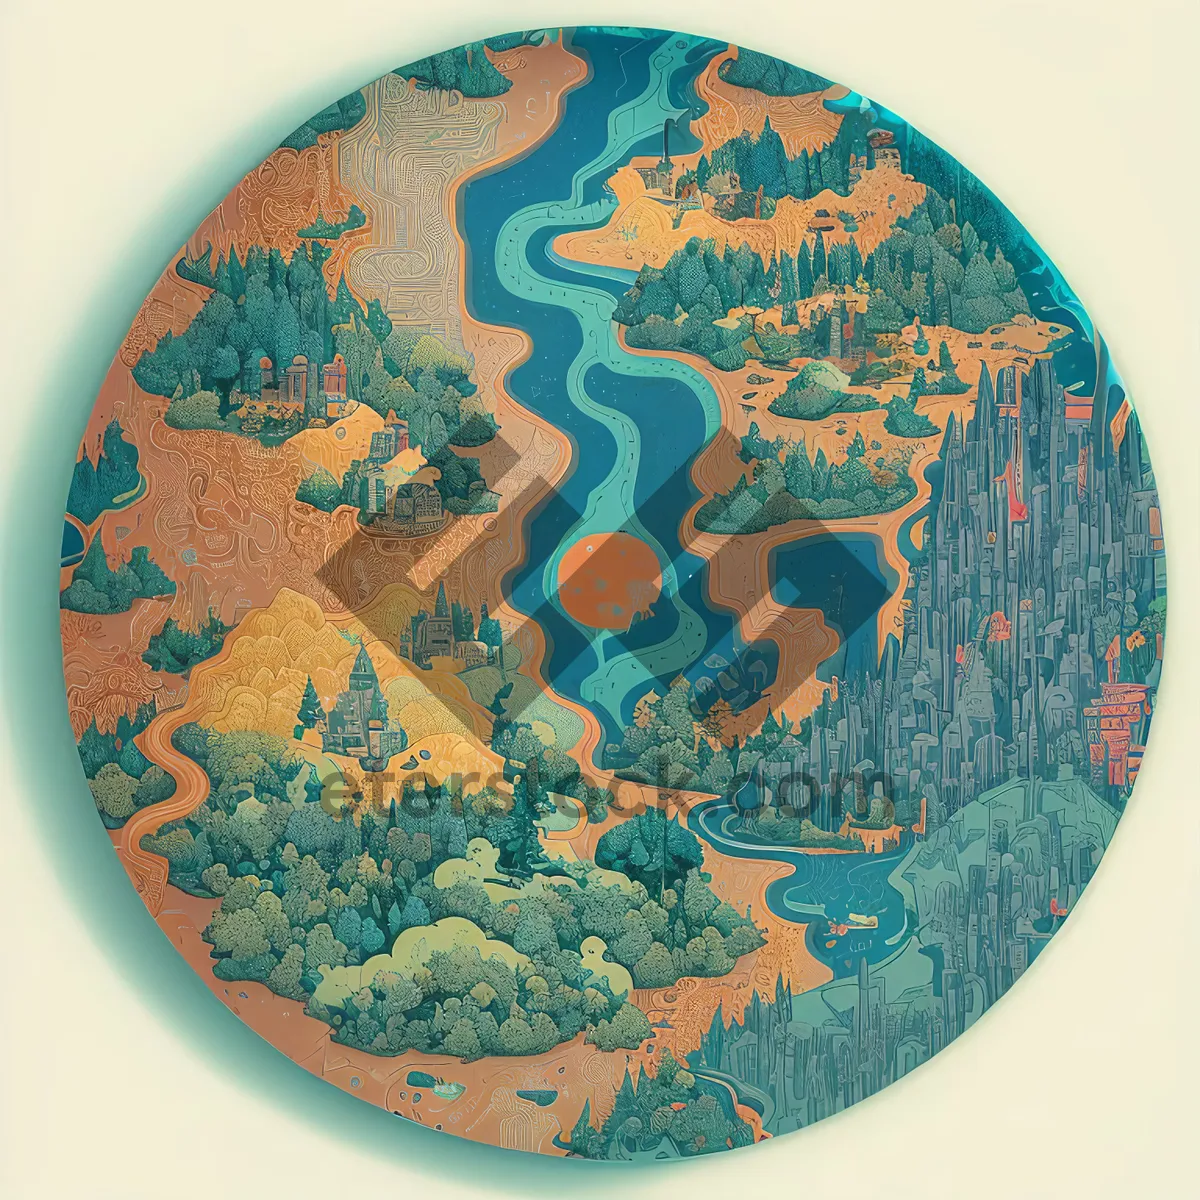 Picture of Global Ceramic Globe: Land, Space, and Continents